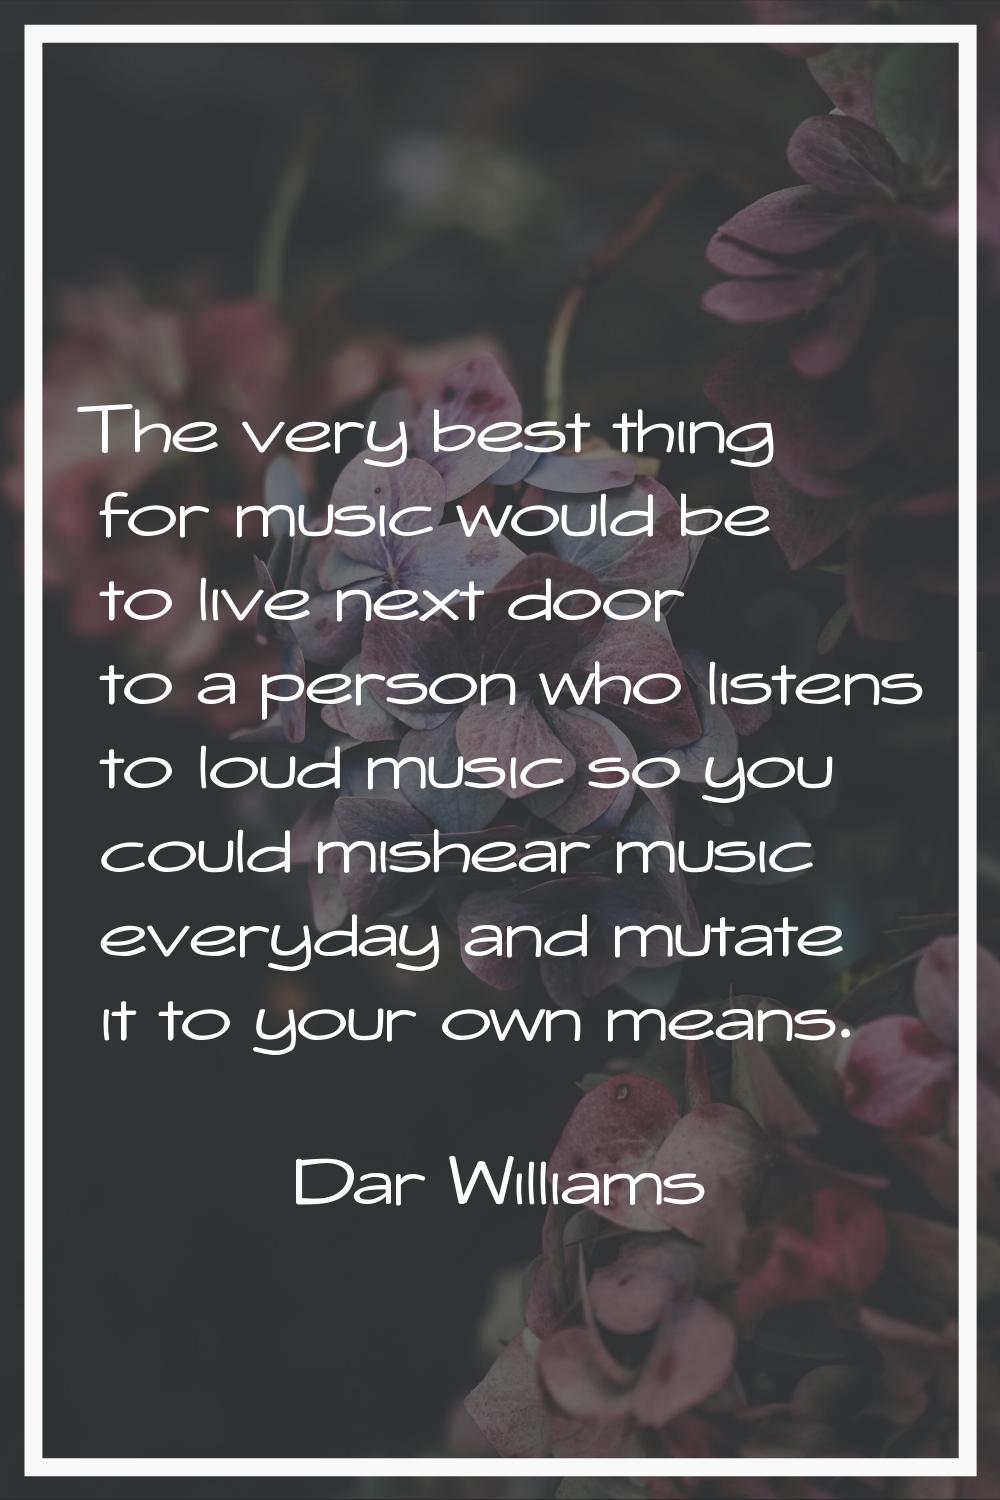 The very best thing for music would be to live next door to a person who listens to loud music so y